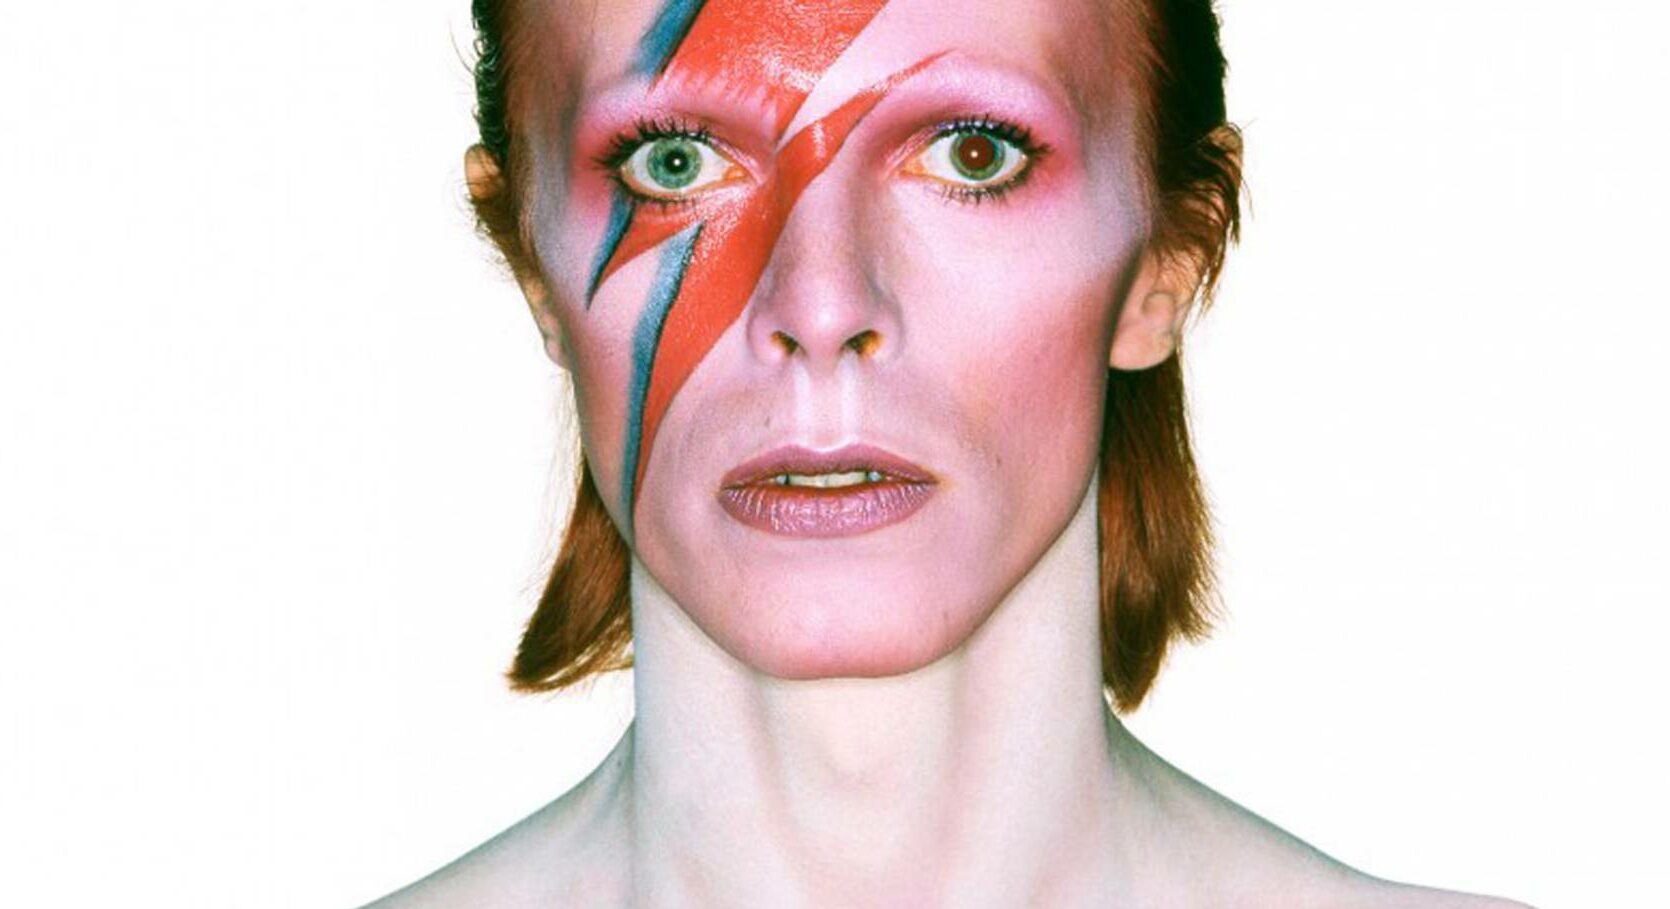 Let’s Dance!  A 100% free exhibition dedicated to David Bowie opens its doors this weekend